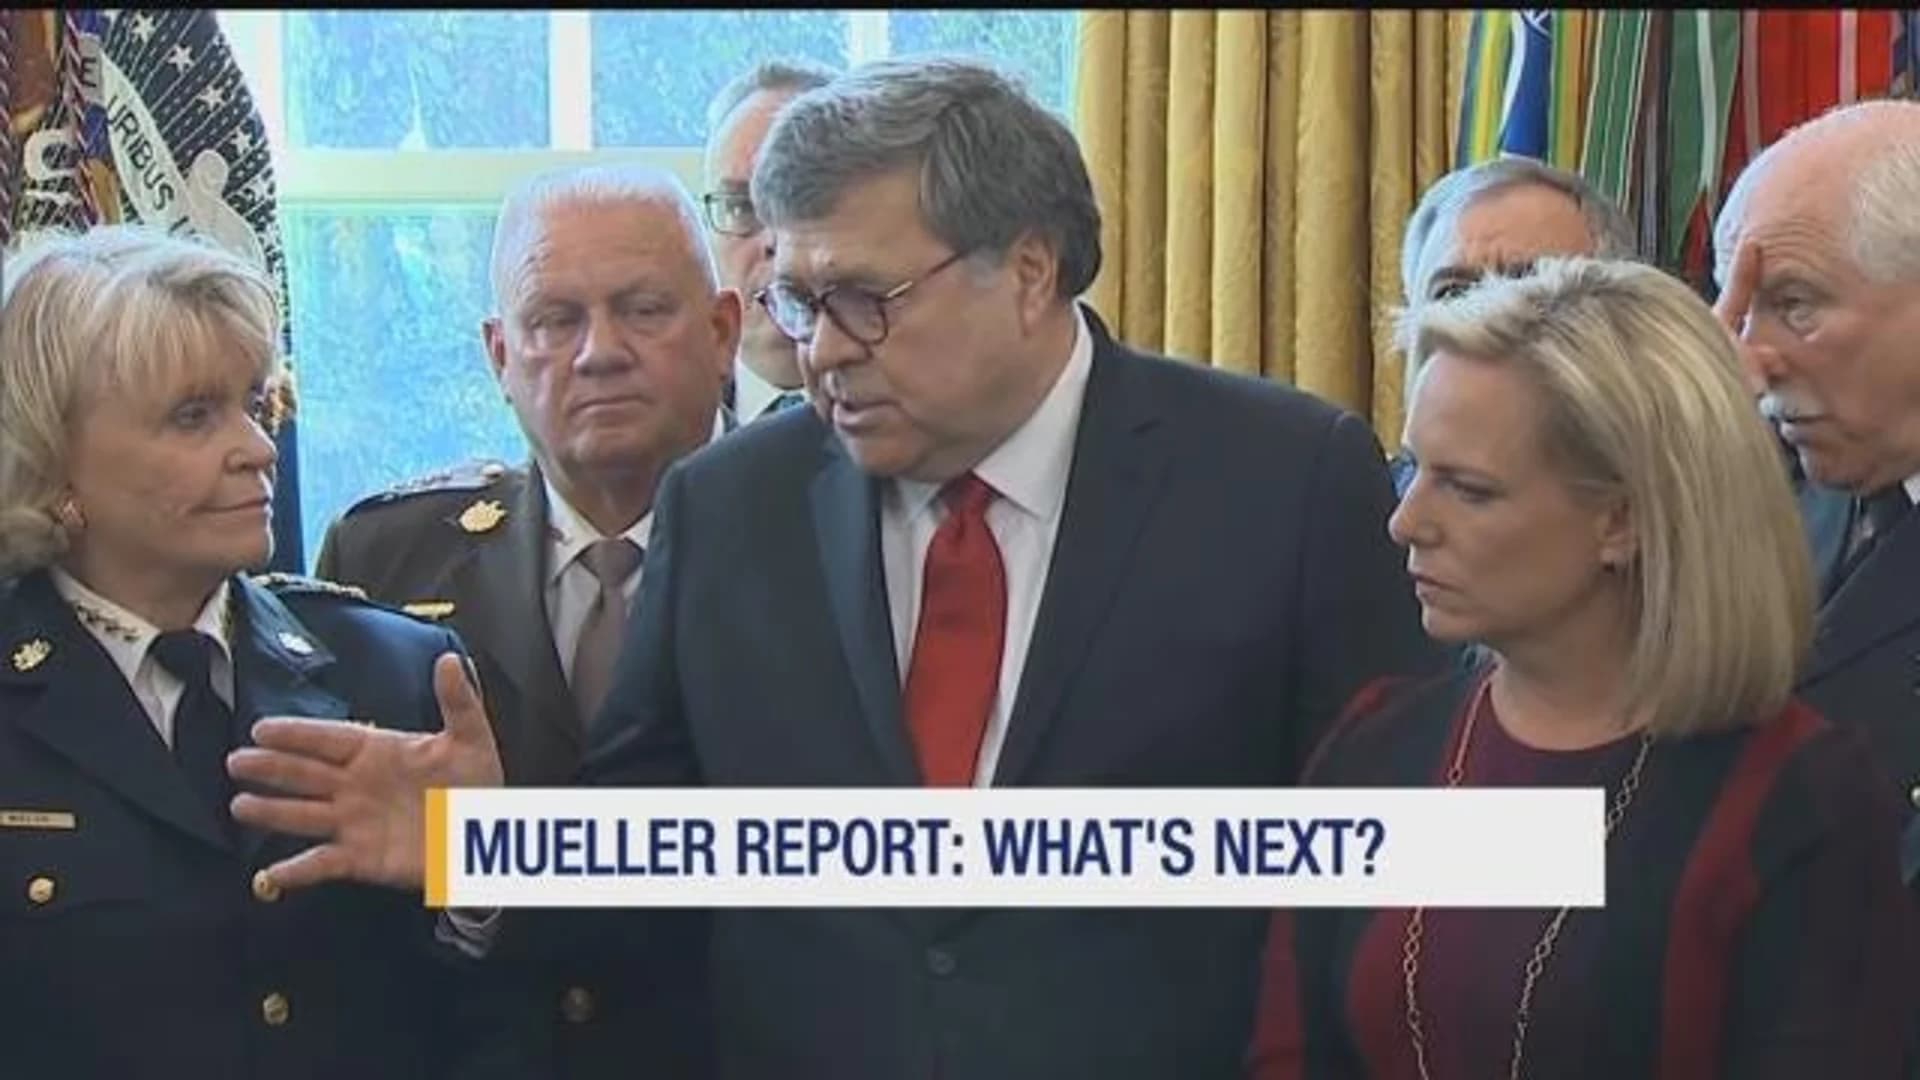 Stamford attorney: Mueller report should be released, Barr could be subpoenaed